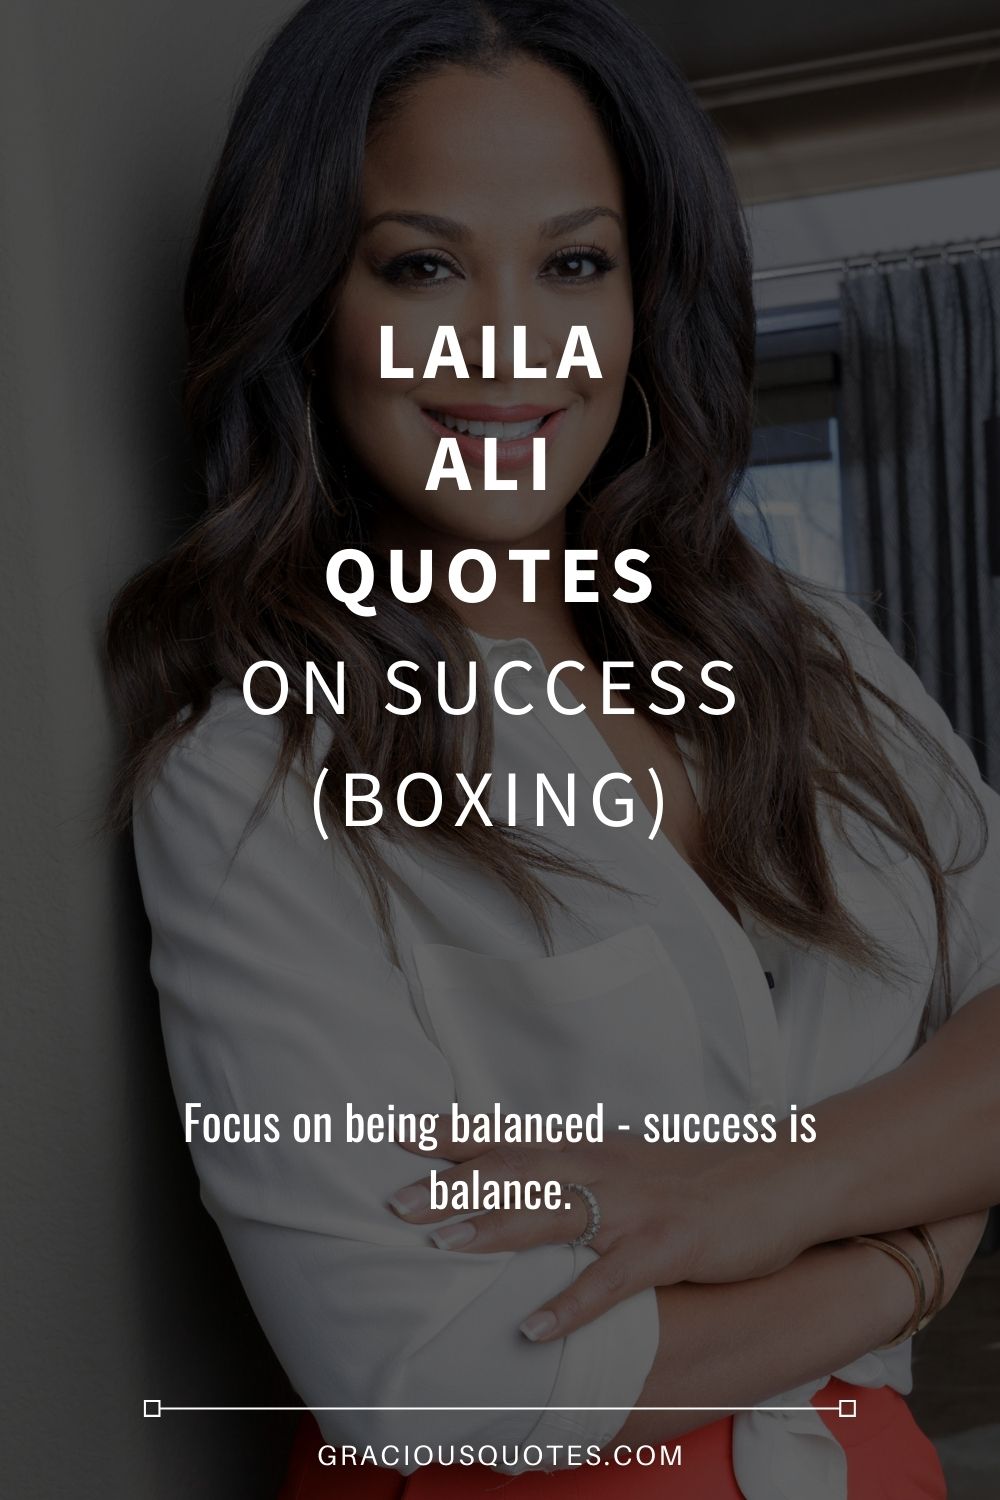 Laila Ali Quotes on Success (BOXING) - Gracious Quotes